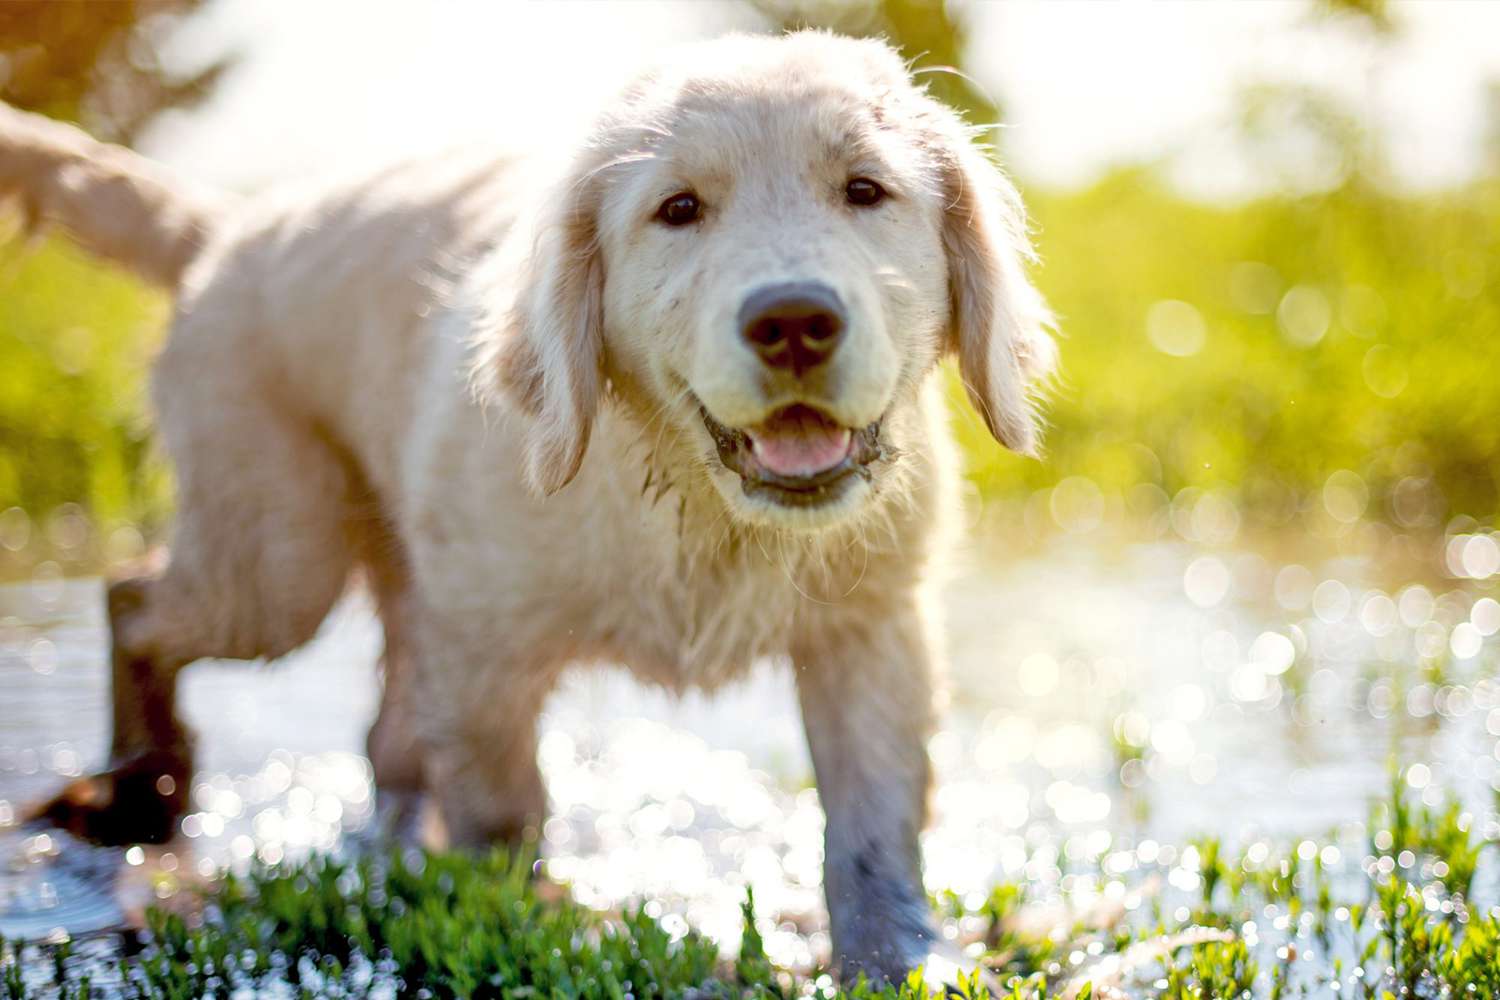 young golden retriever walking through muddy water; Study Suggests Adolescent Dogs Act Similarly to Teenage Humans